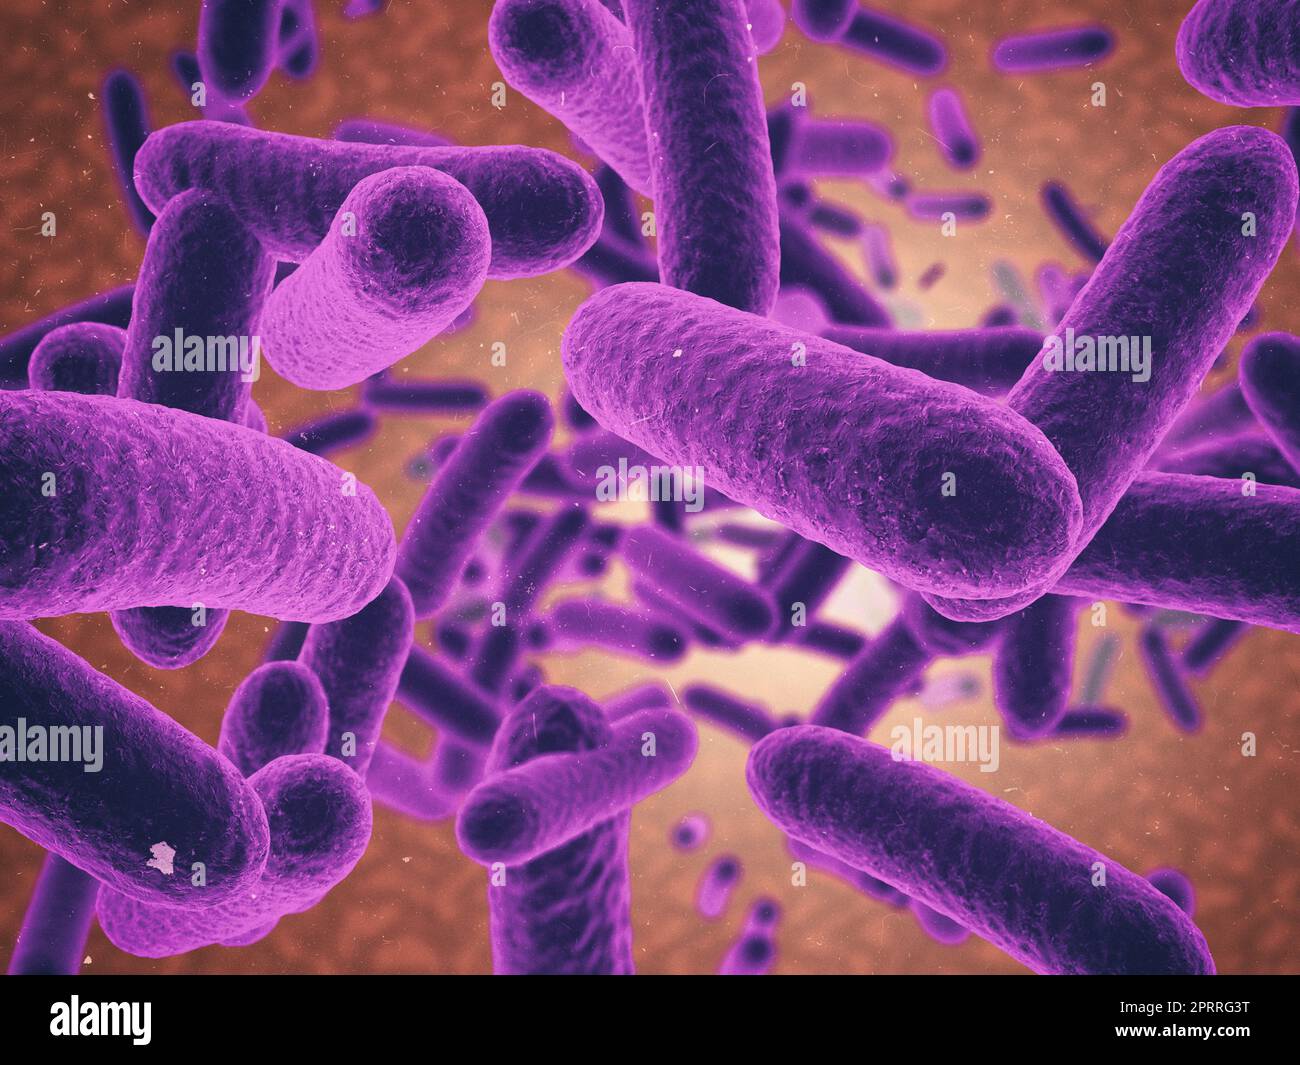 Attacking your immune system. Microscopic view of a virus in color. Stock Photo